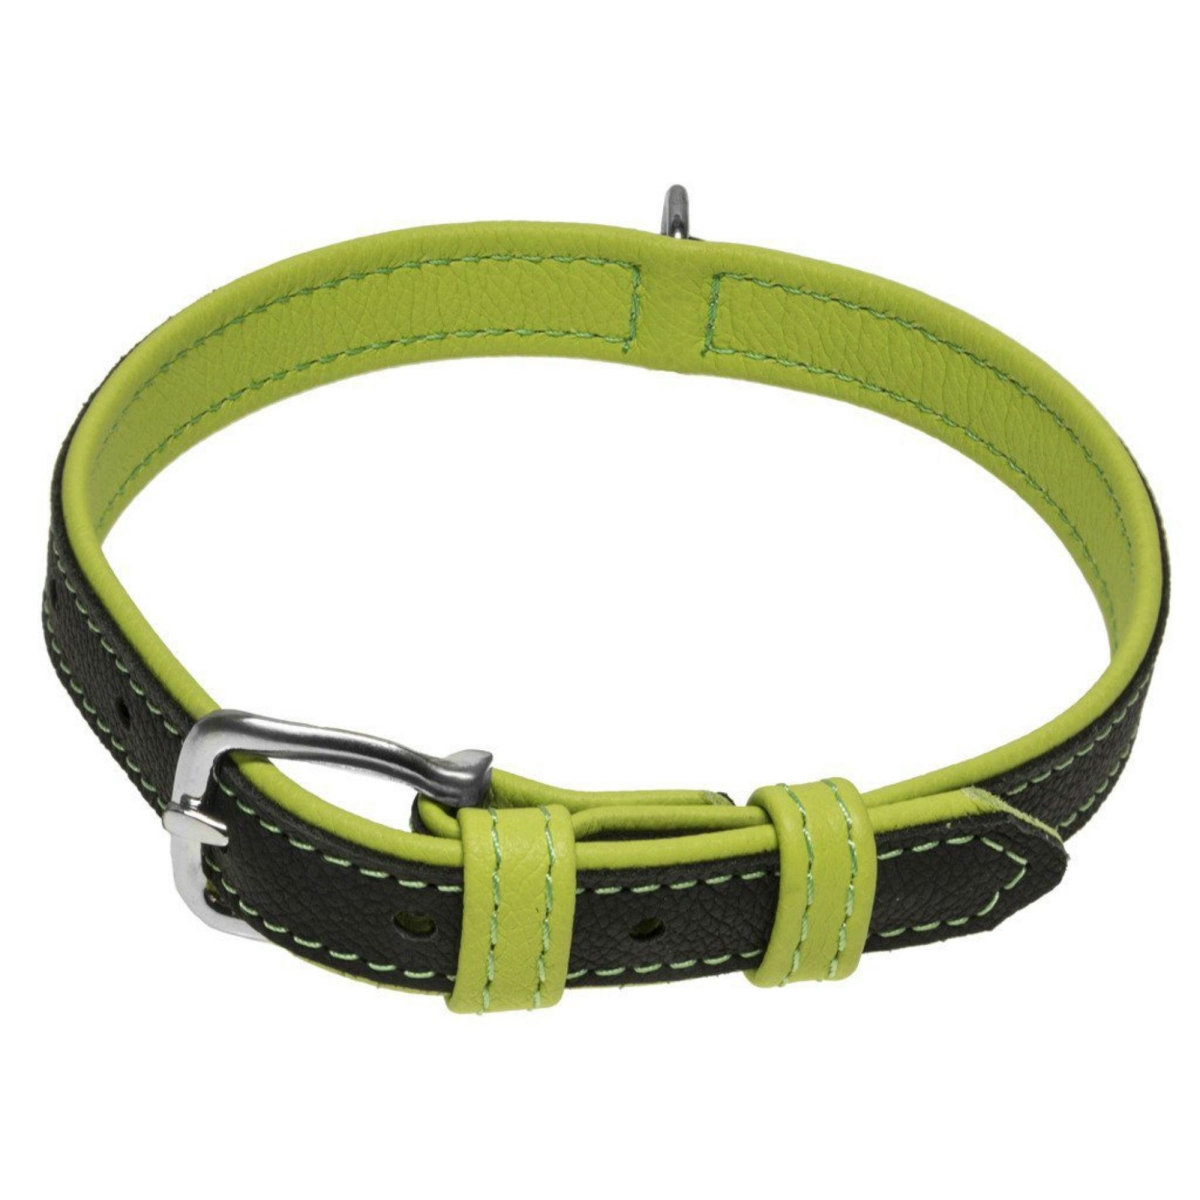 Soft Leather Dual Color Dog Collar, Lime Green - Medium